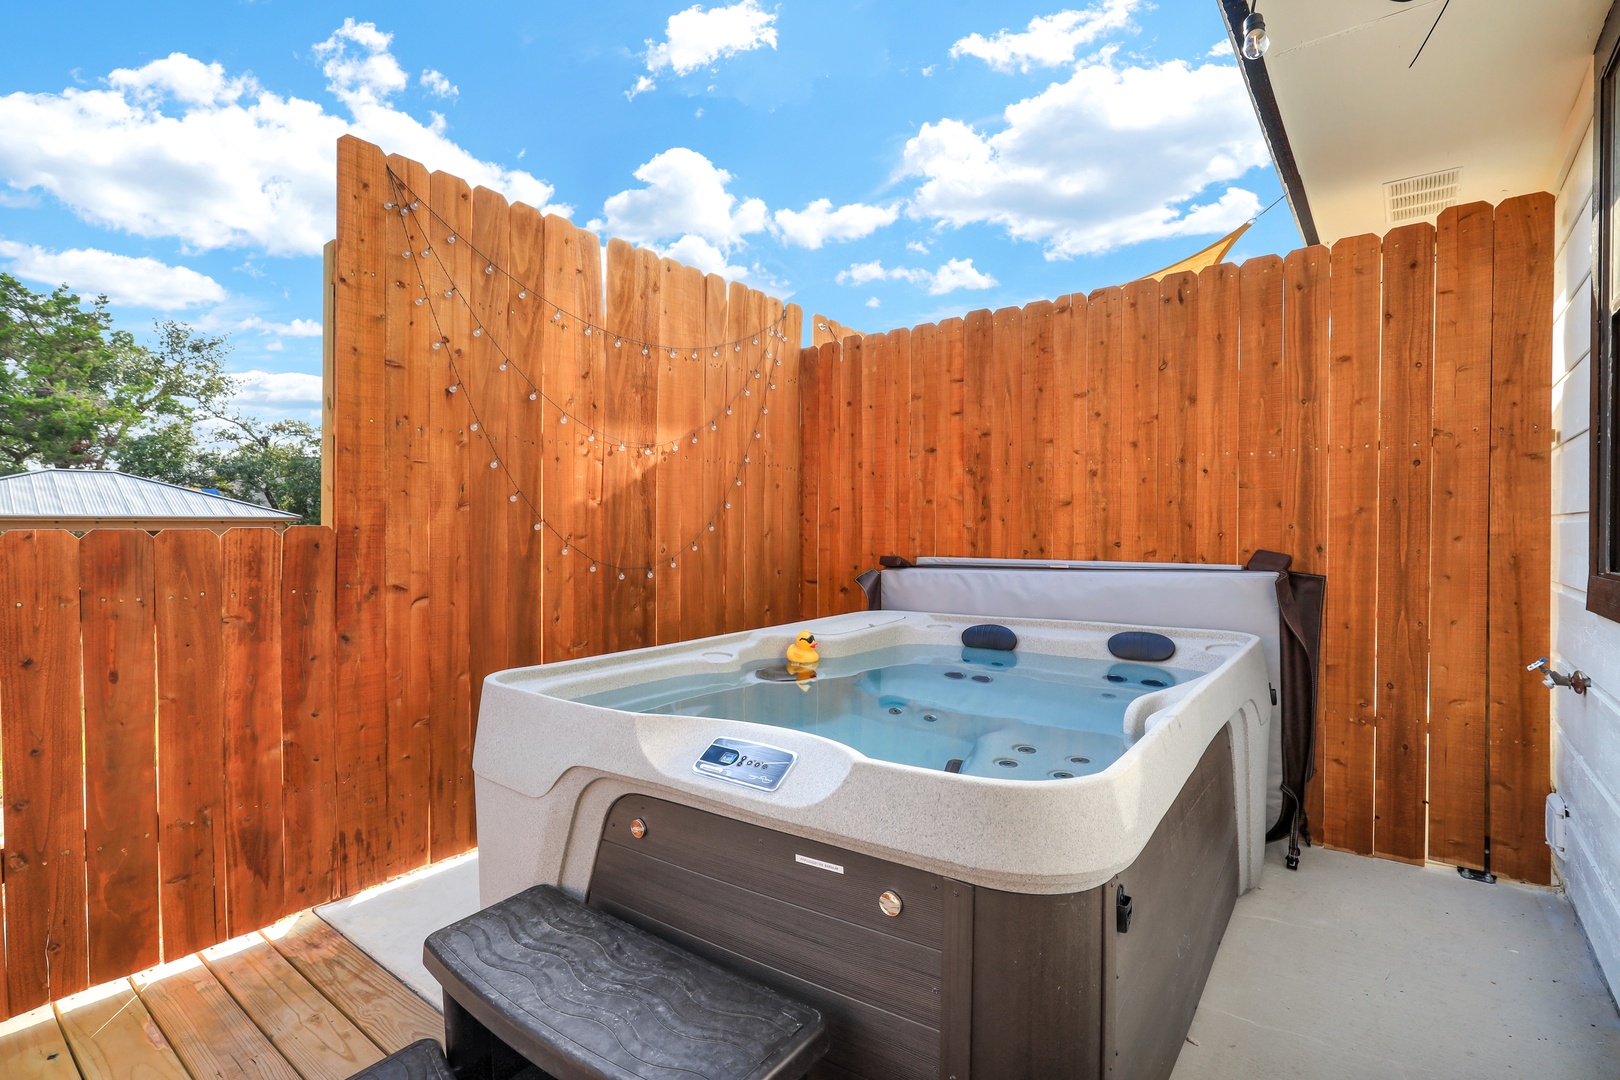 Head out to the patio to lounge & unwind in the bubbling hot tub